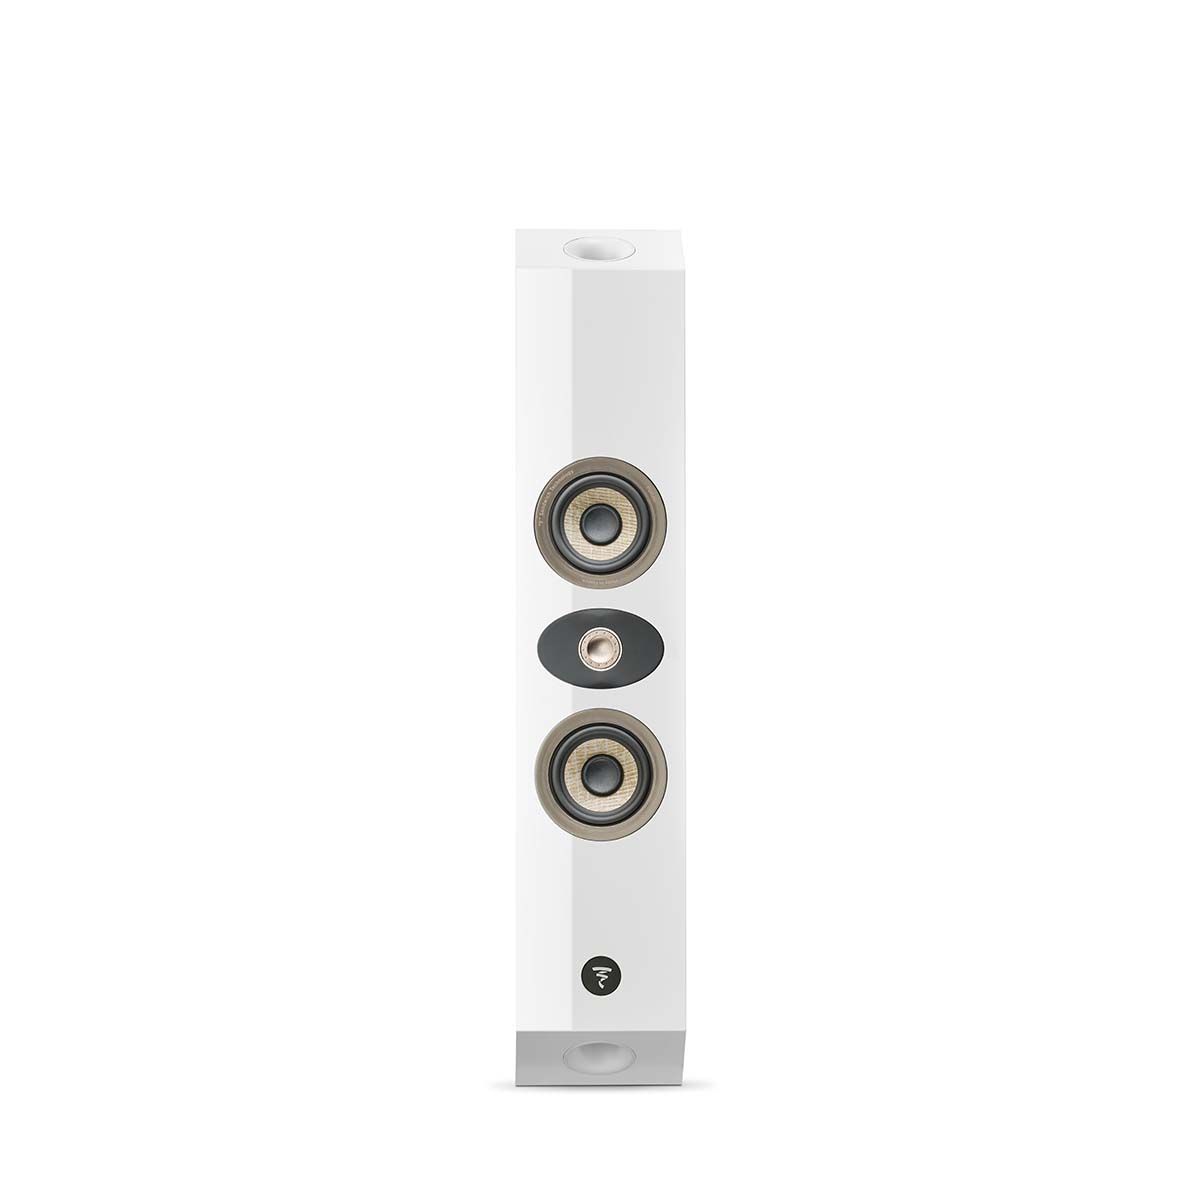 Focal On Wall 301 Speaker, Gloss White, vertical front view without grille